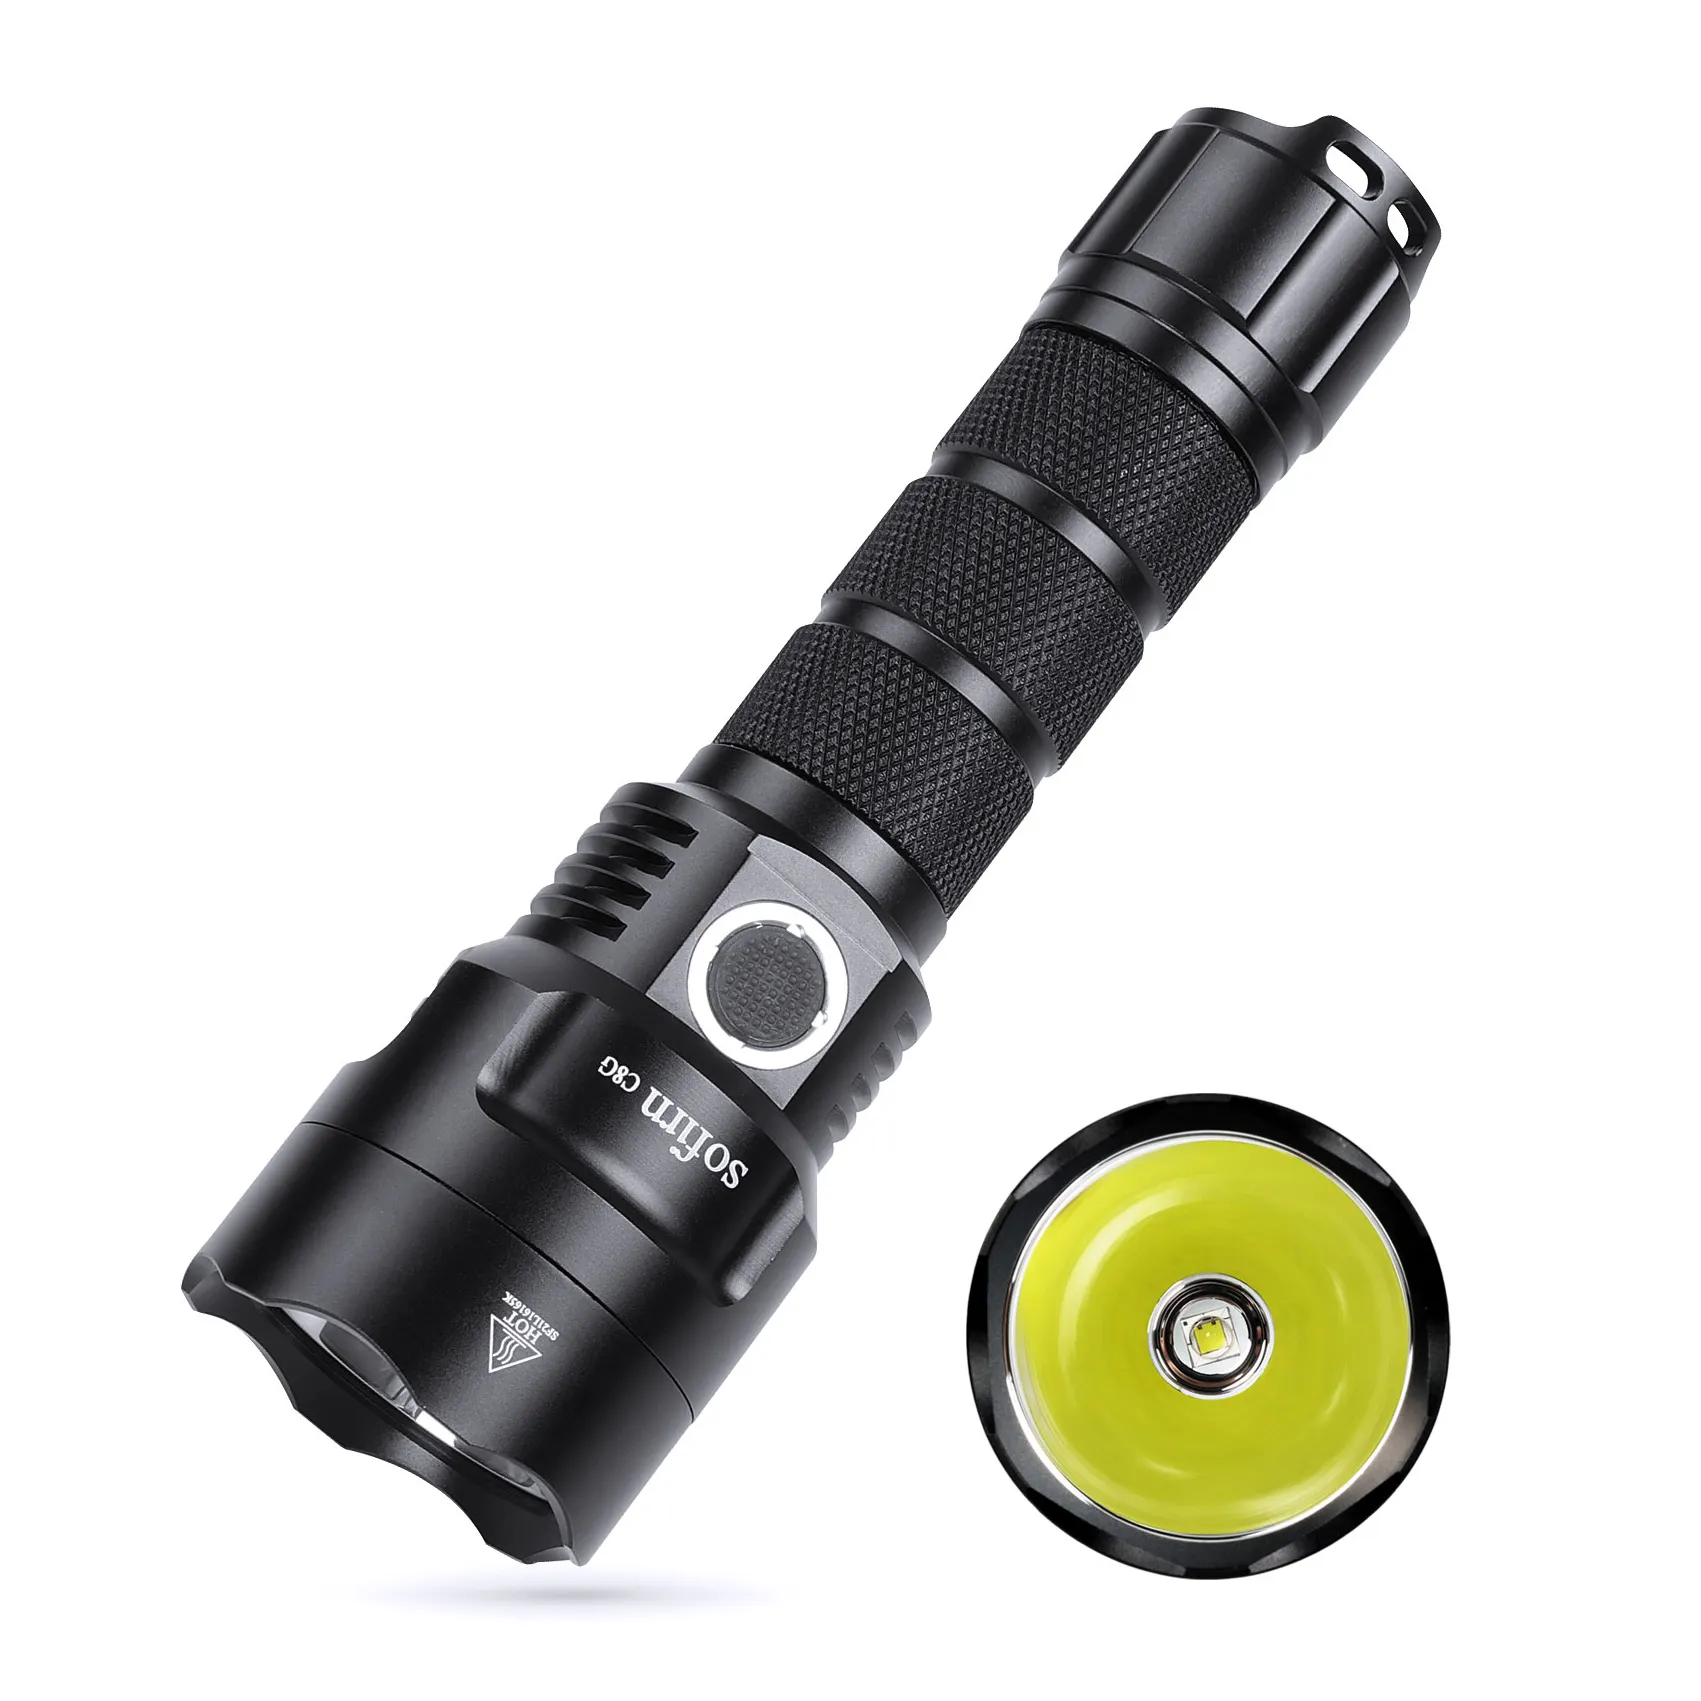 C8G Powerful 21700 SST40 2000lm Rechargeable Long Beam Torch with ATR 2 Groups Ramping Indicator Tactical Flashlight